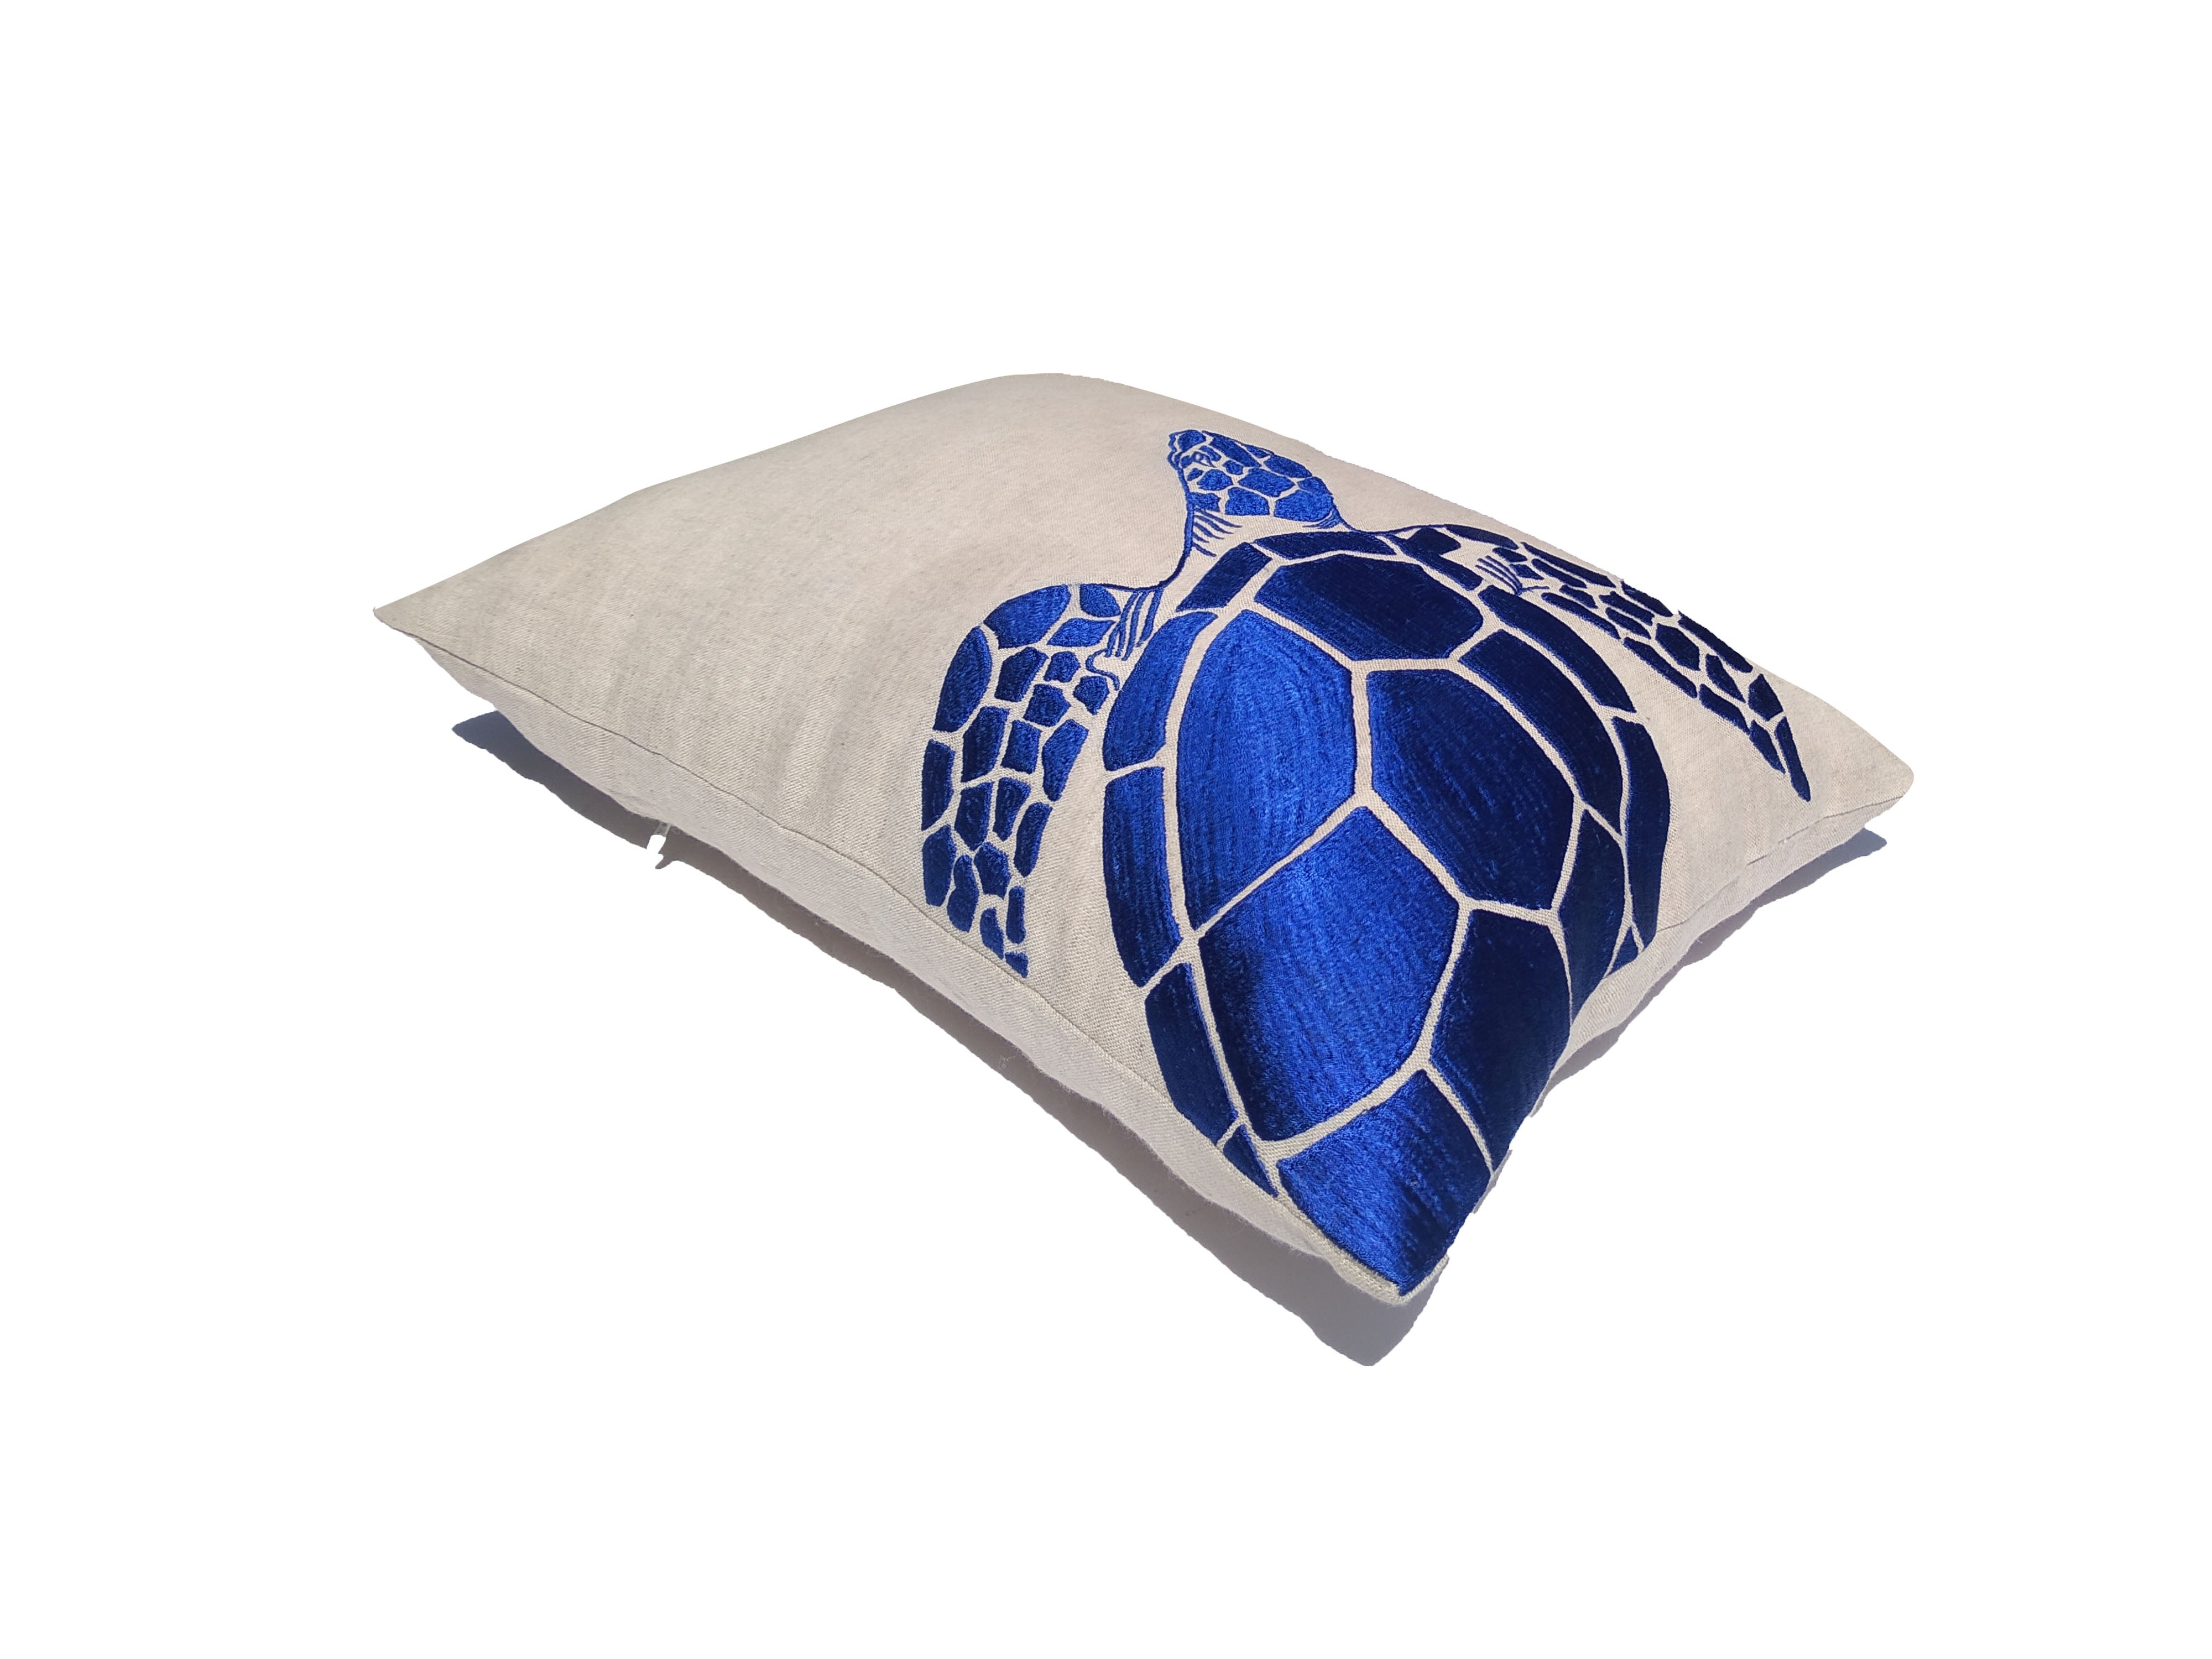 Amore Beaute Blue Turtle Throw Pillow